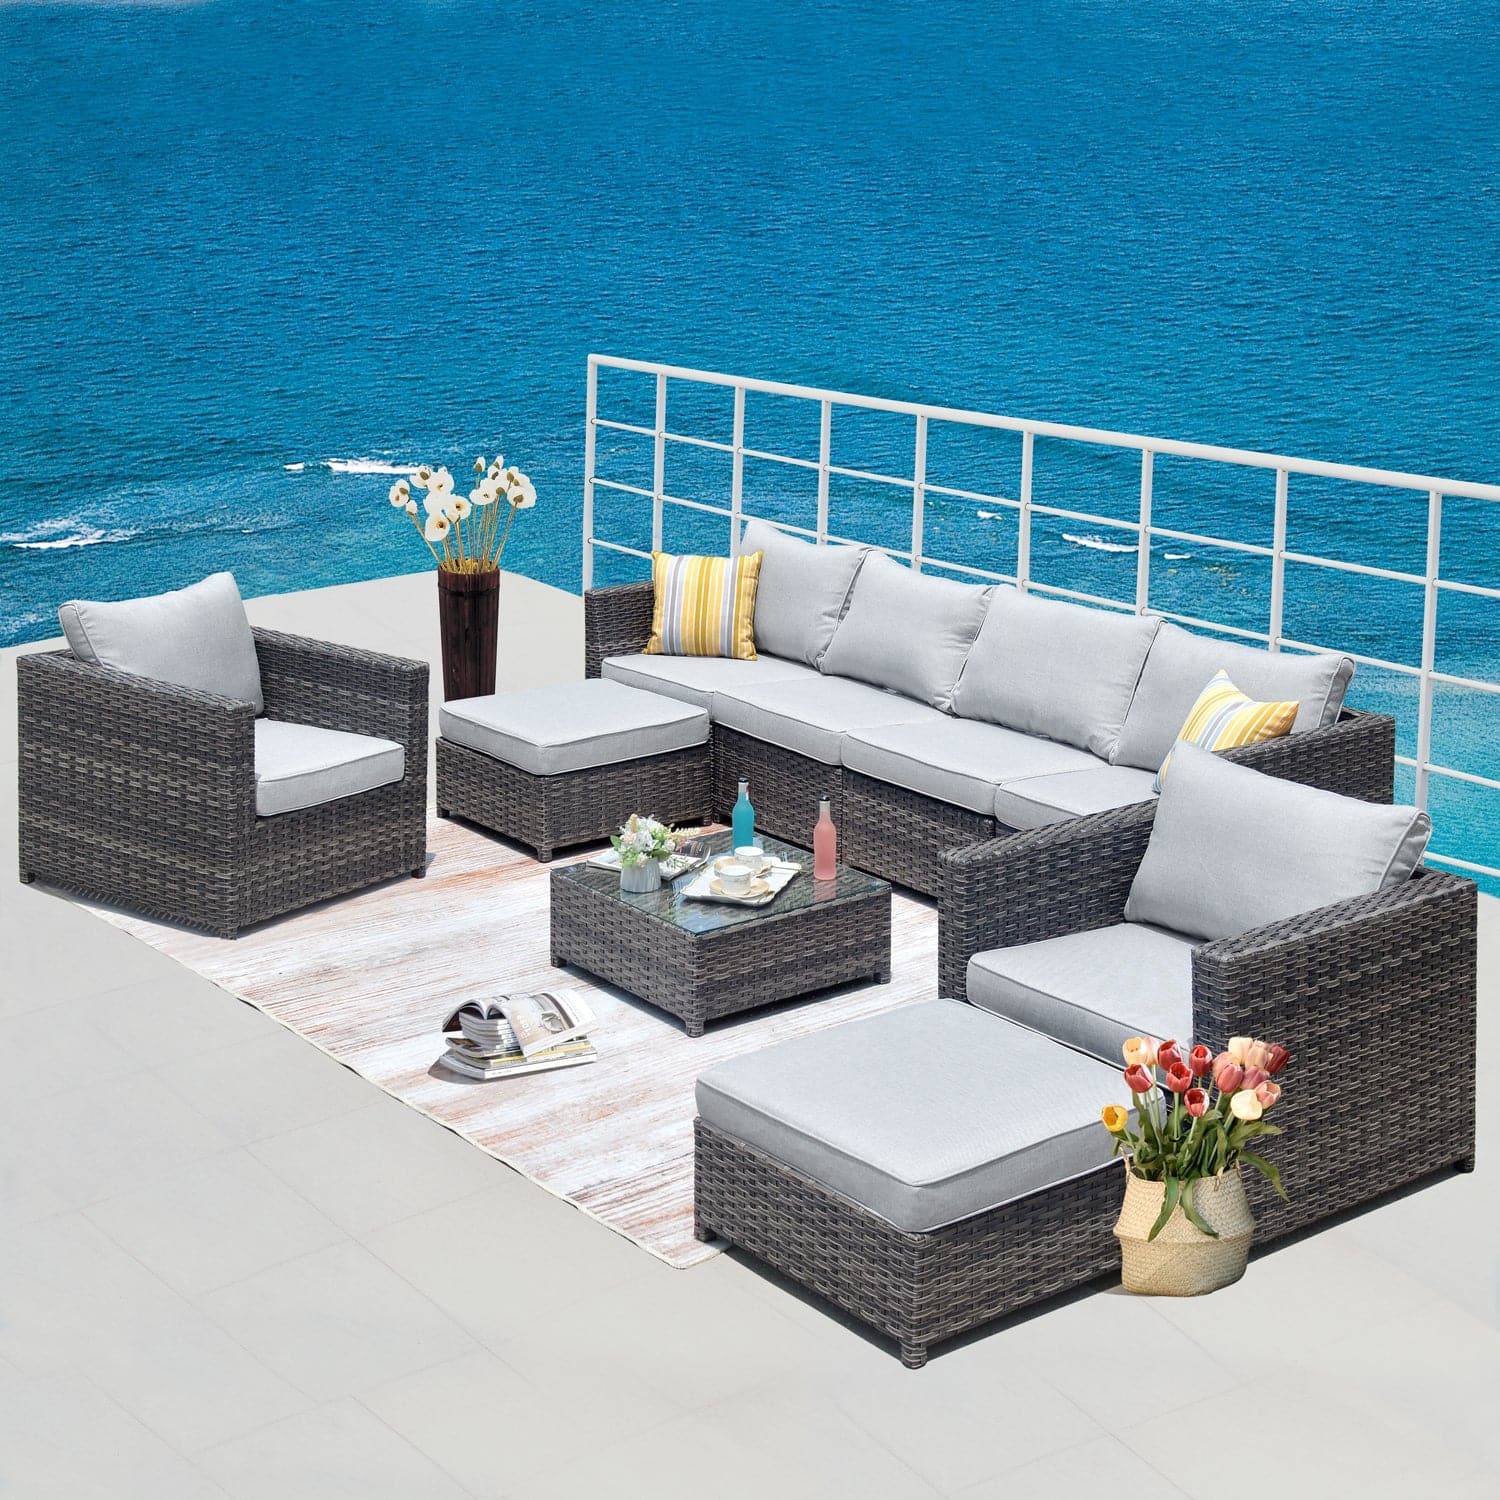 Ovios Outdoor Furniture Bigger Size 9-Piece, King Series, Fully Assembled, with 2 Chairs